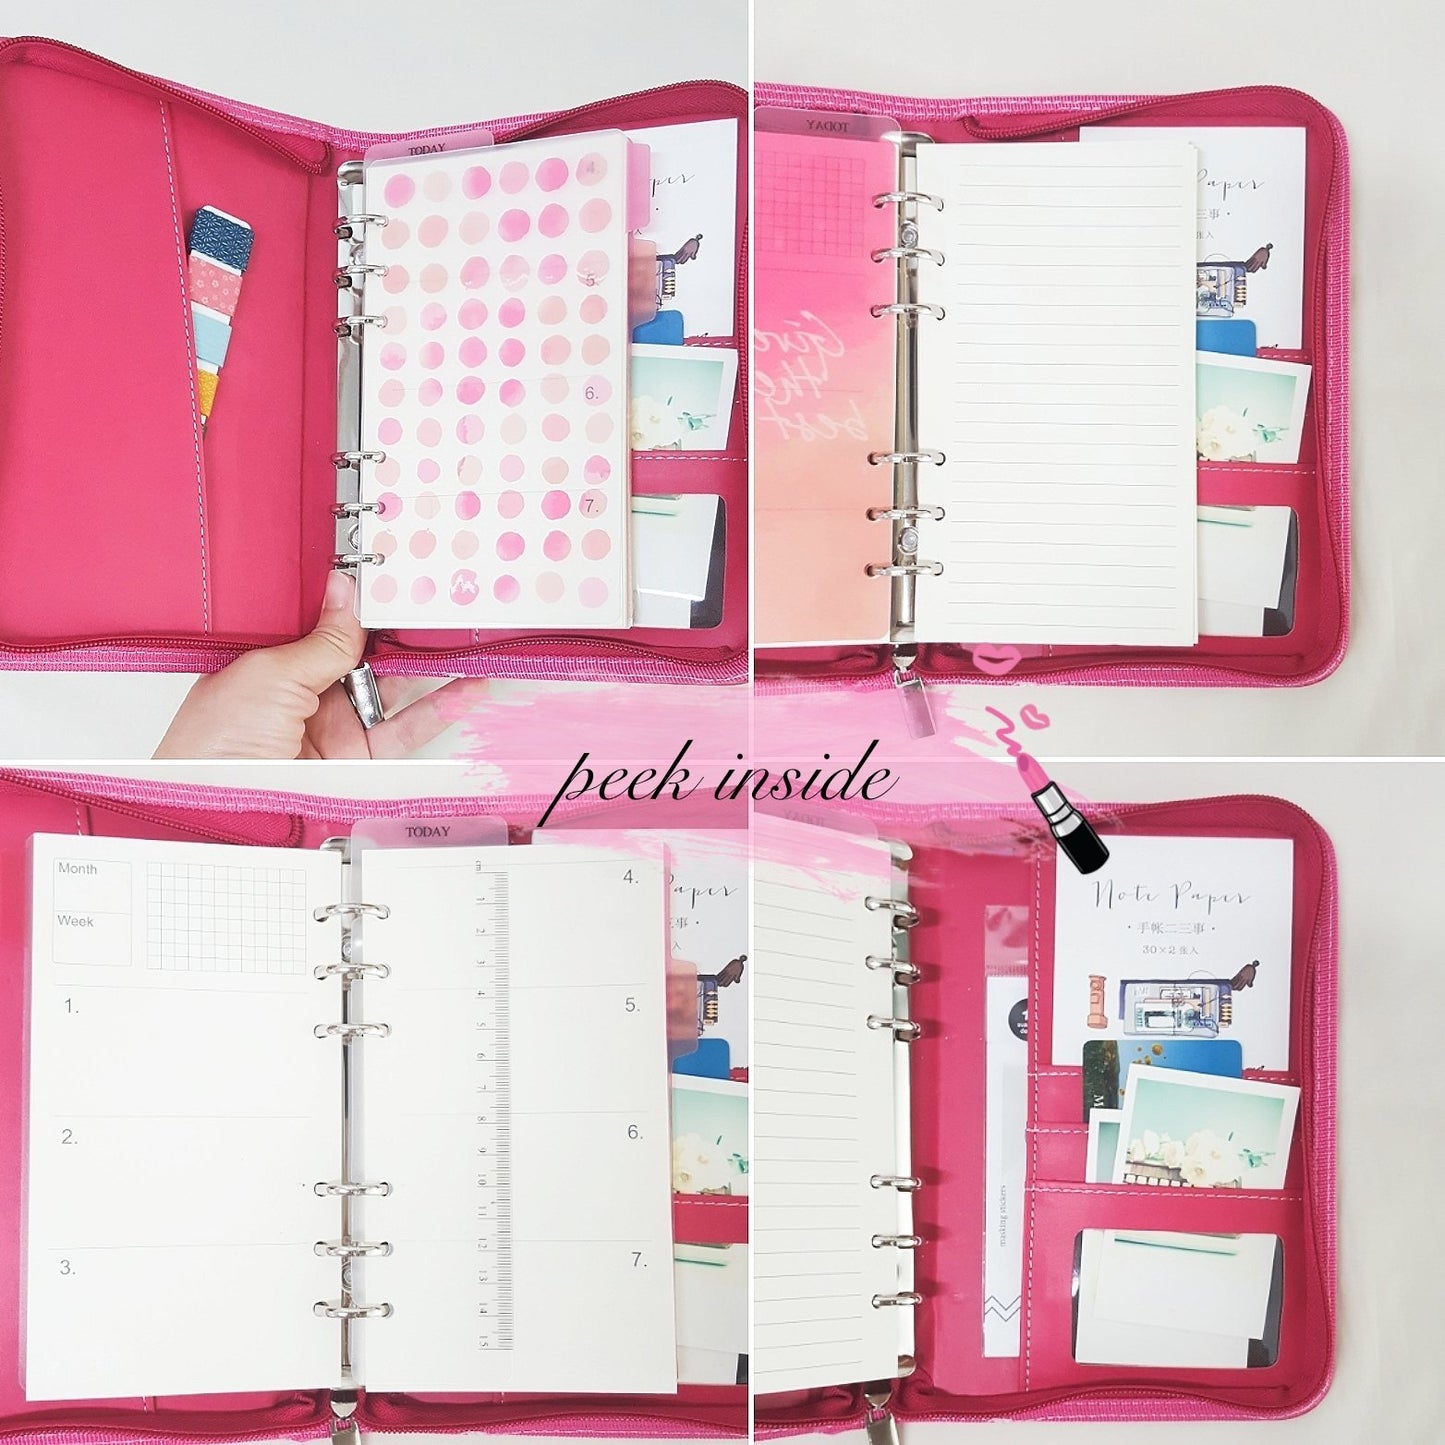 Pink Lady PU leather A6 Zipper Planner - Happiness Idea